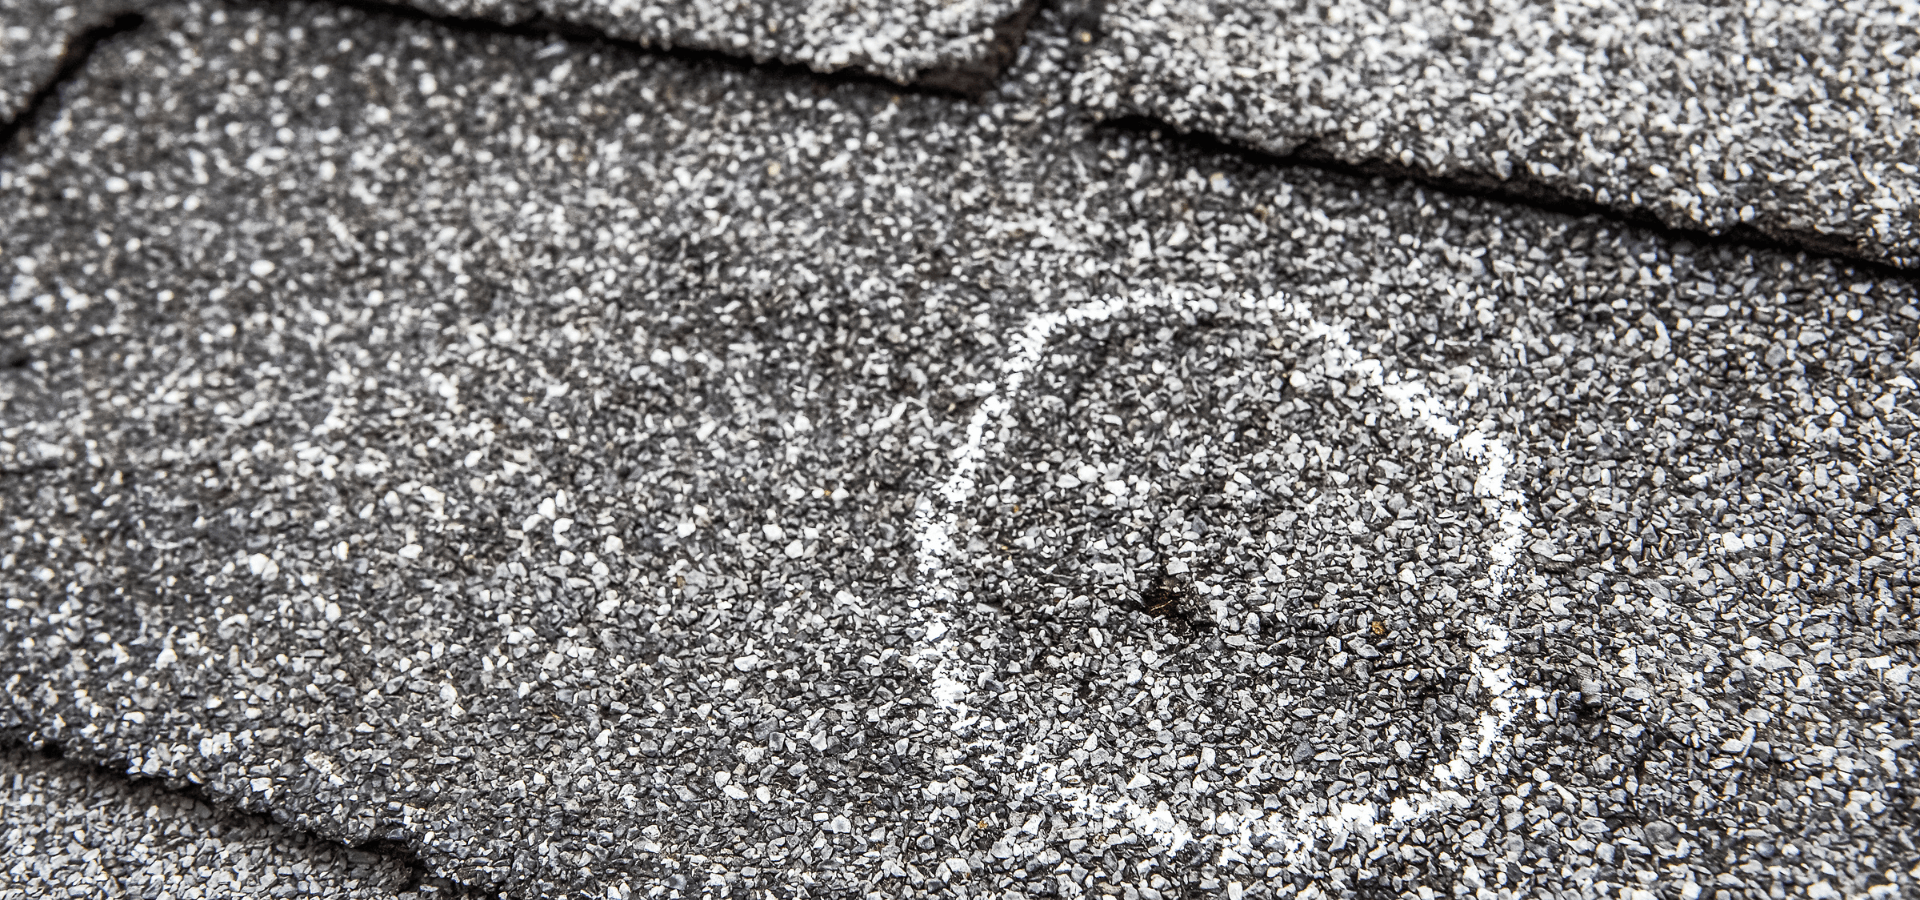 Asphalt shingles with hail damage being inspected for a potential roof replacement project